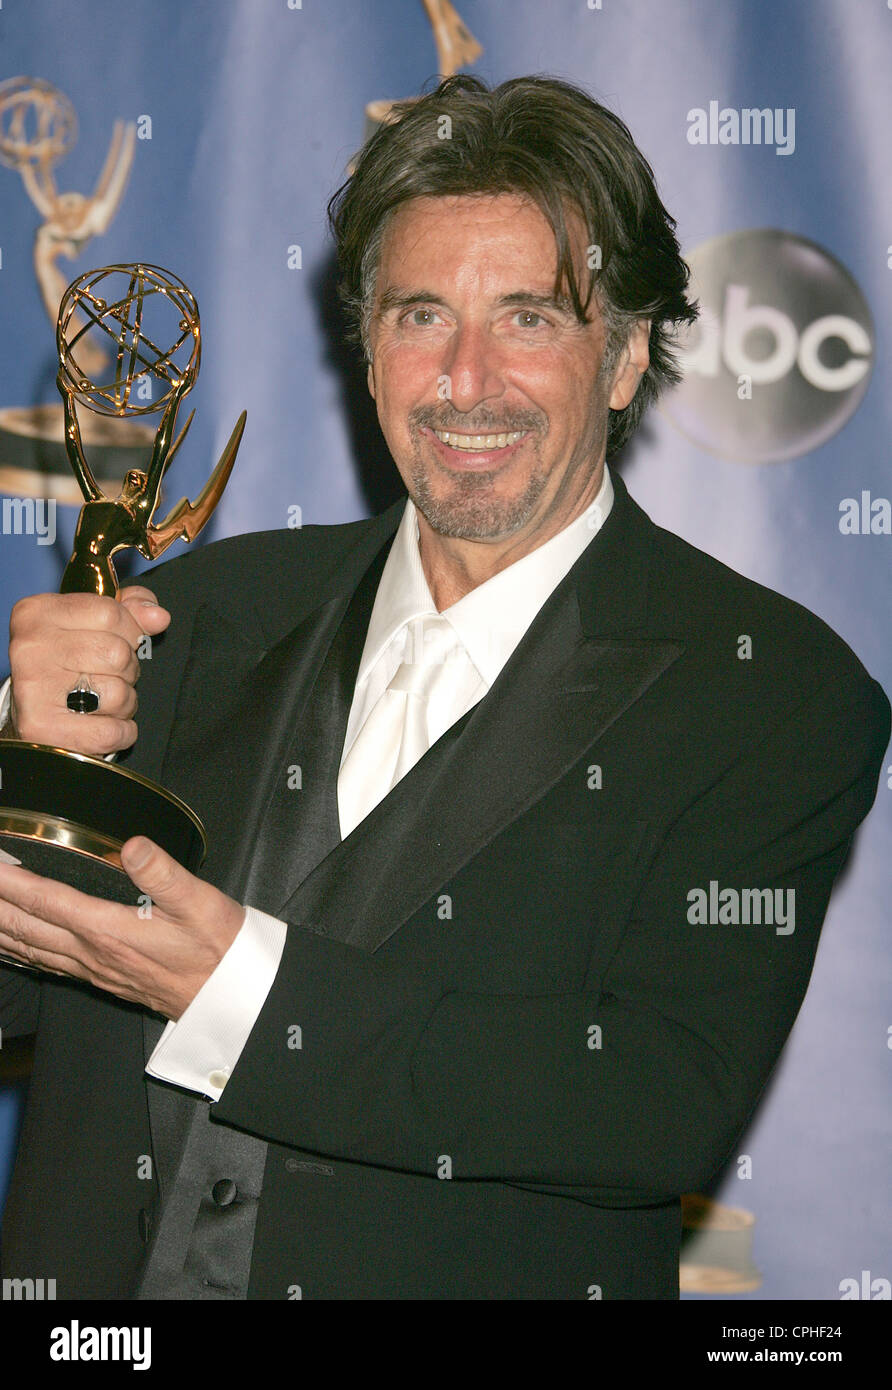 AL PACINO with award for  Outstanding Lead Actor In A Miniseries Or A Movie, 'Angels in America' produced in 2003. Stock Photo